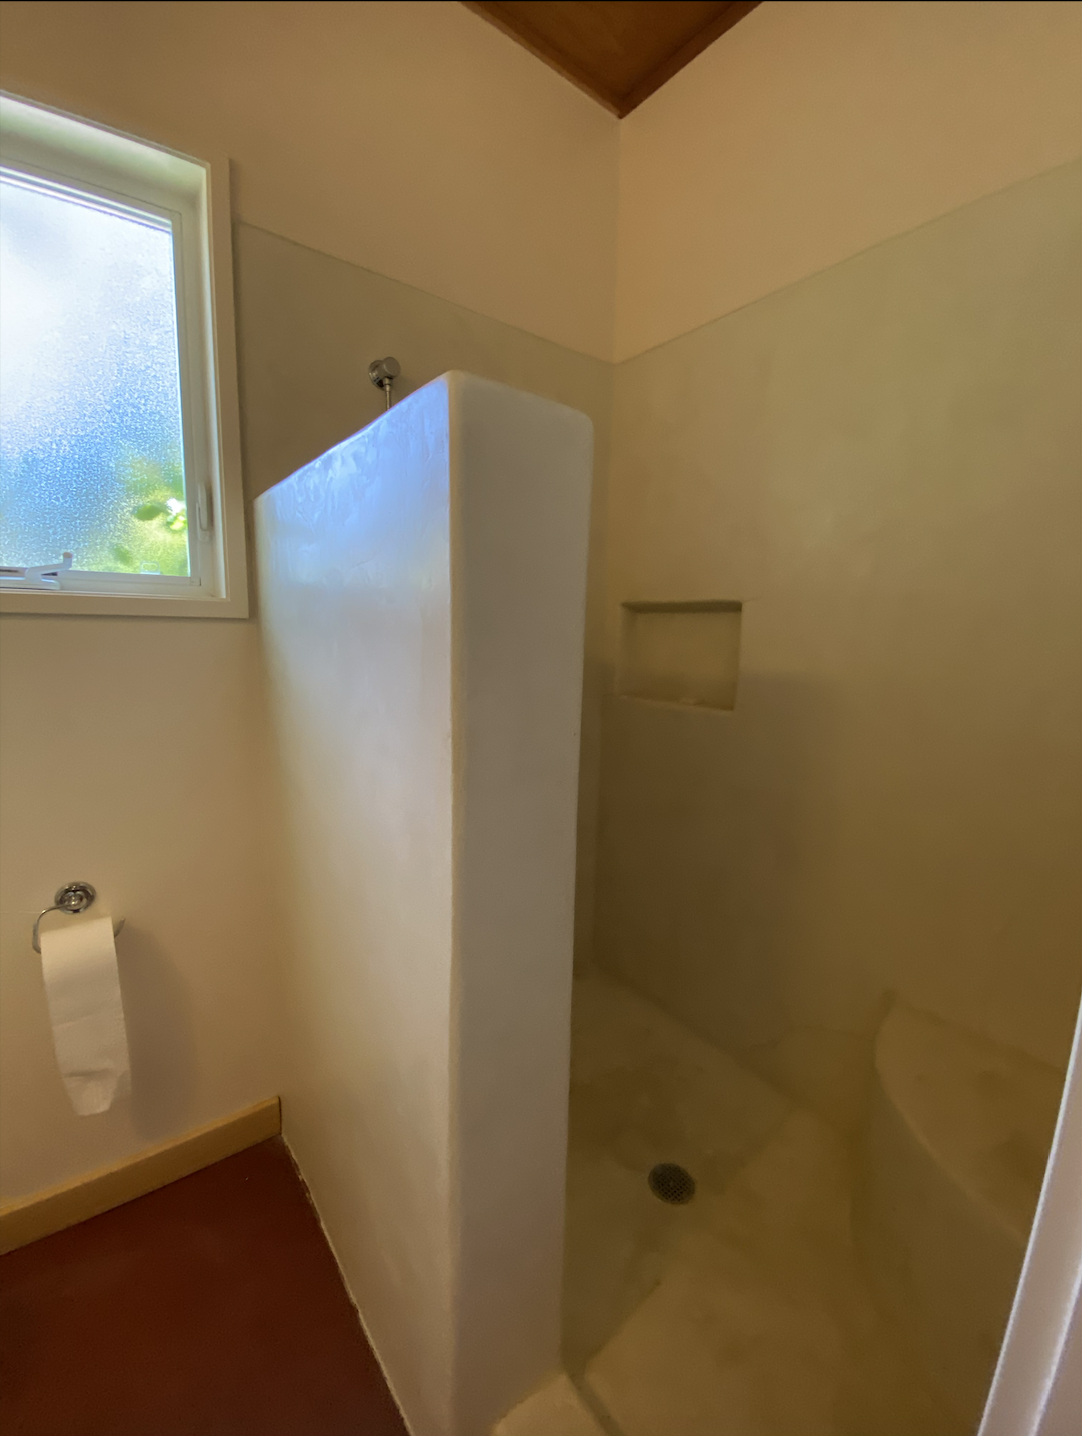  A bathroom with off-white walls and a half wall enclosing a shower. There is a window above a toilet paper holder on the wall.  